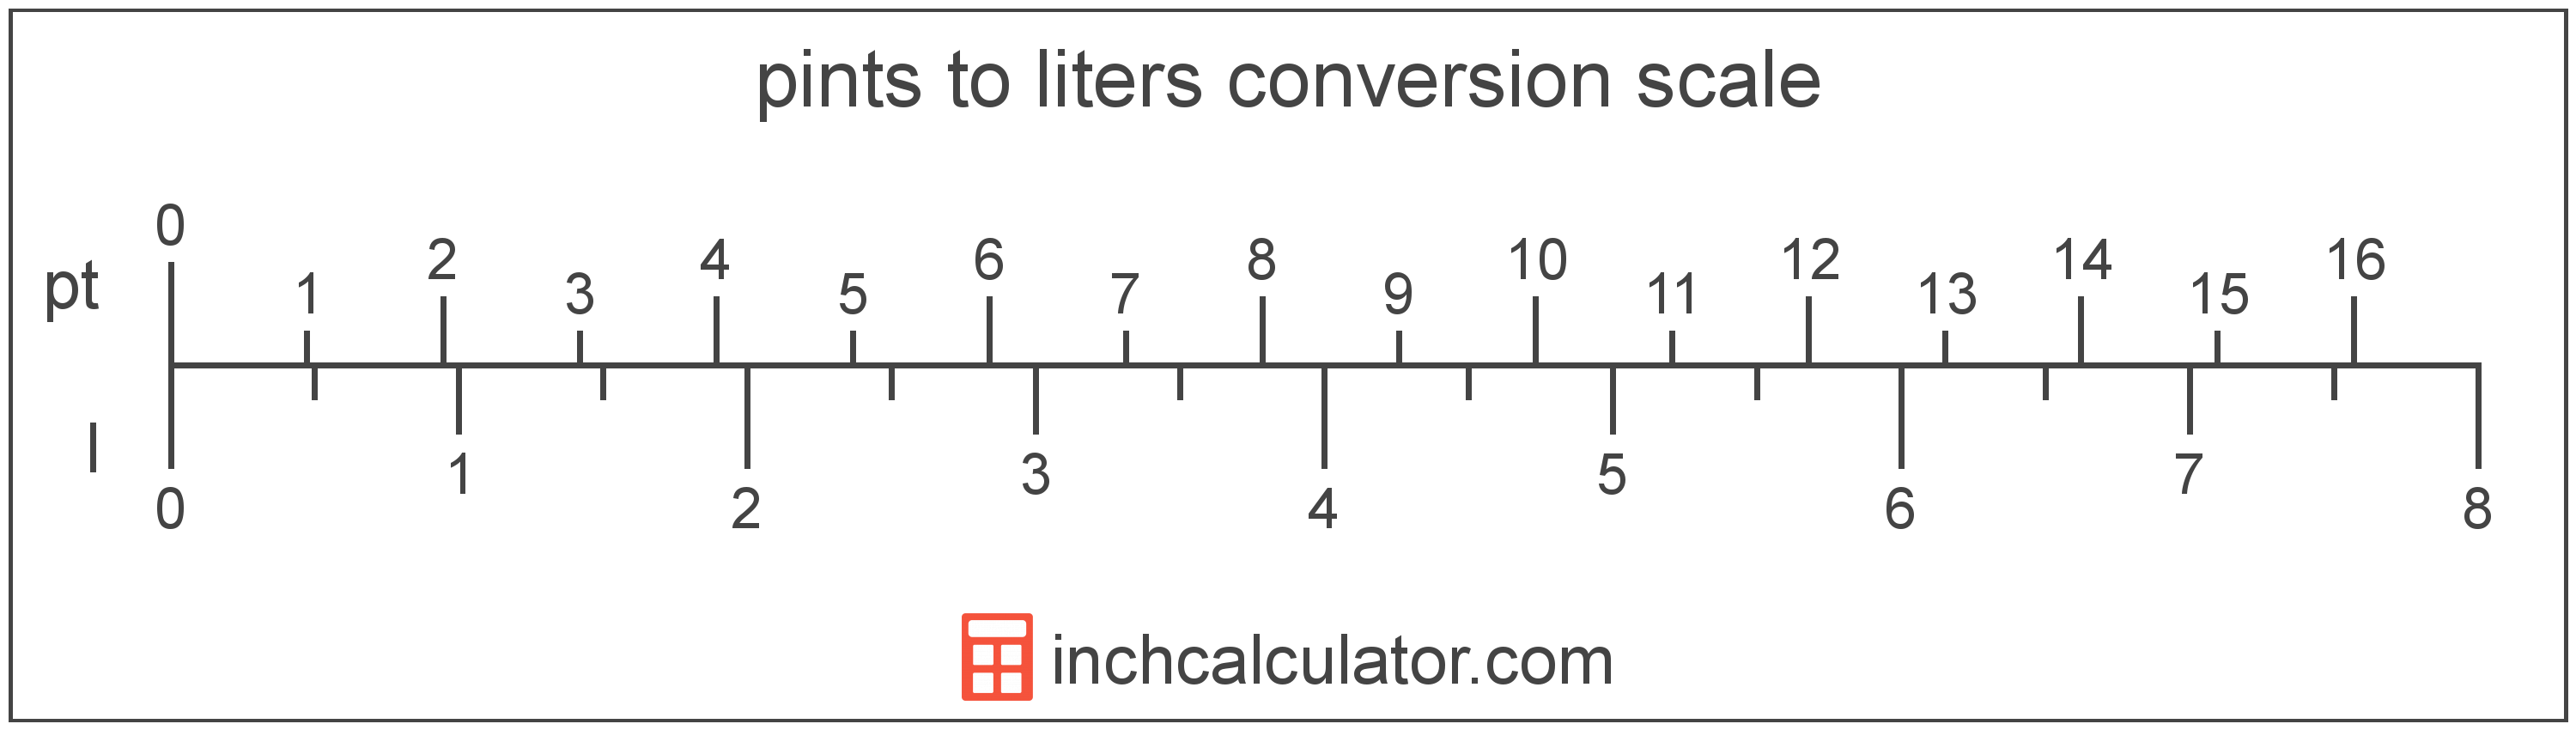 Litres To Pints Conversion Chart